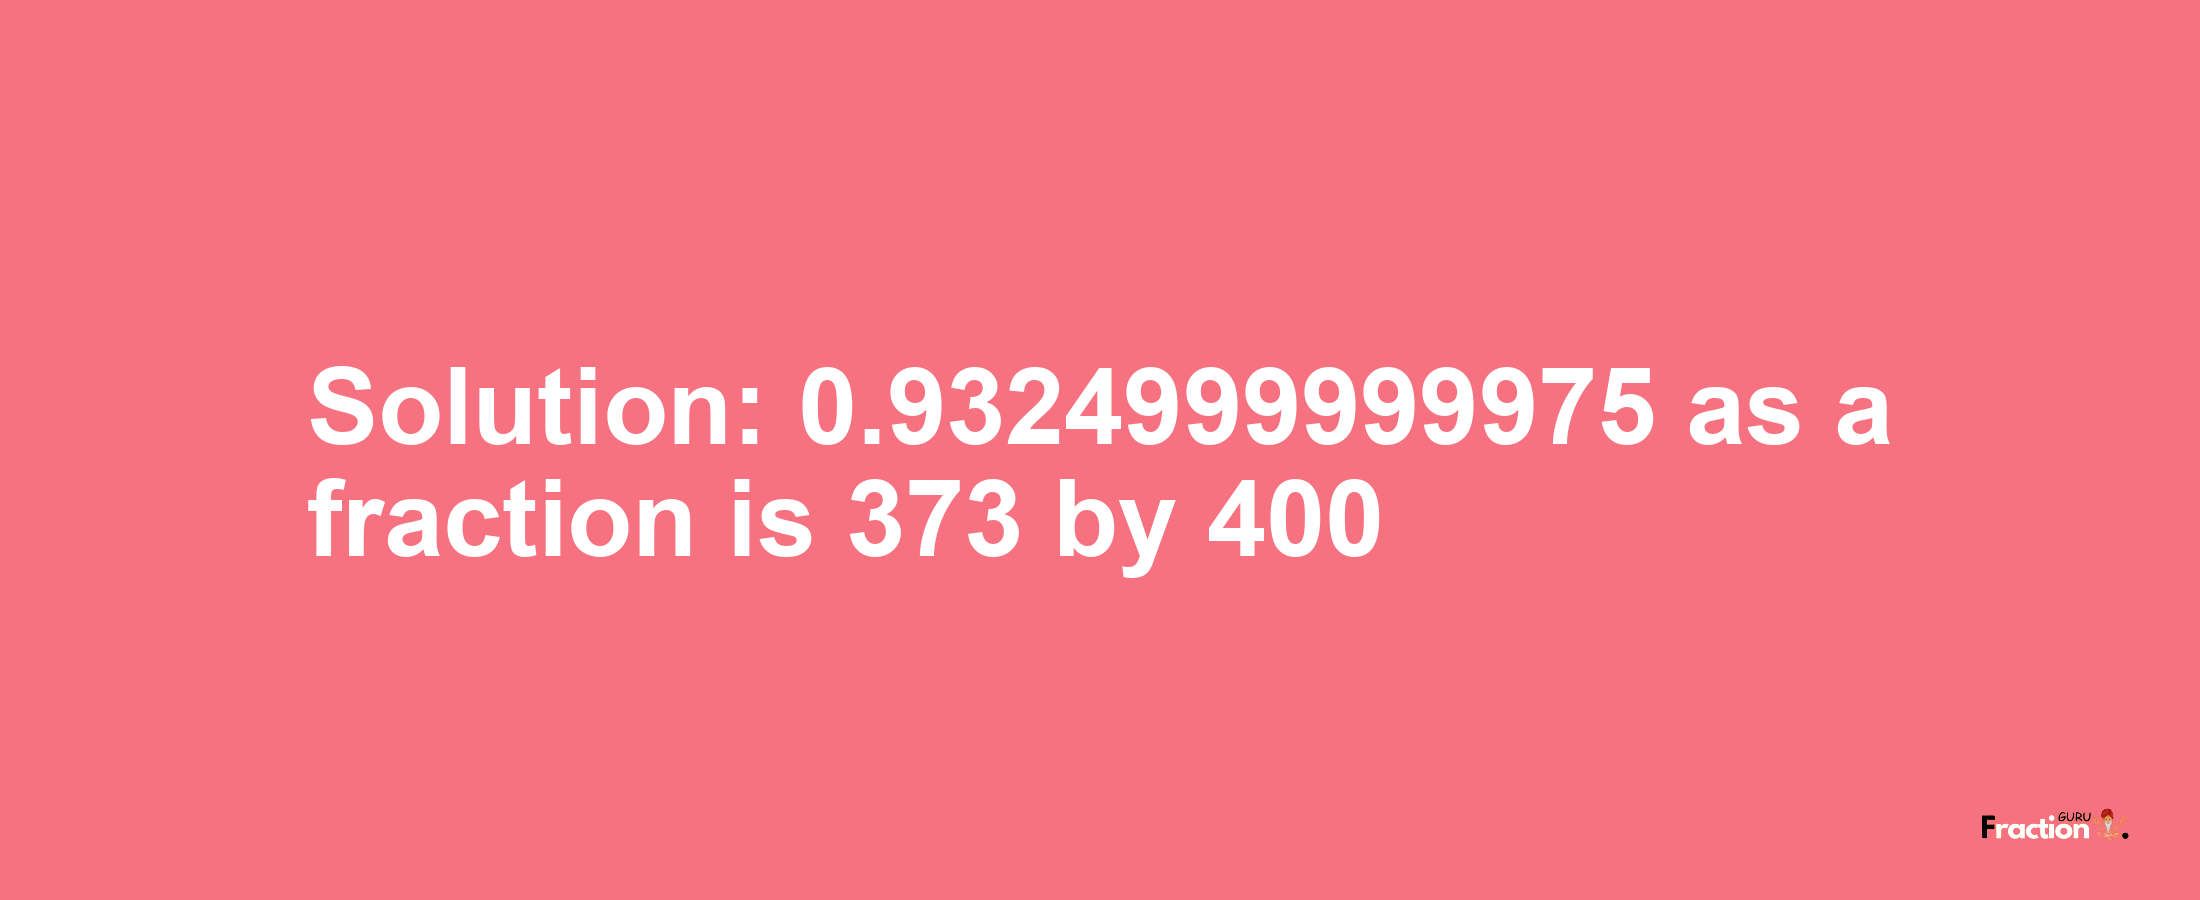 Solution:0.9324999999975 as a fraction is 373/400